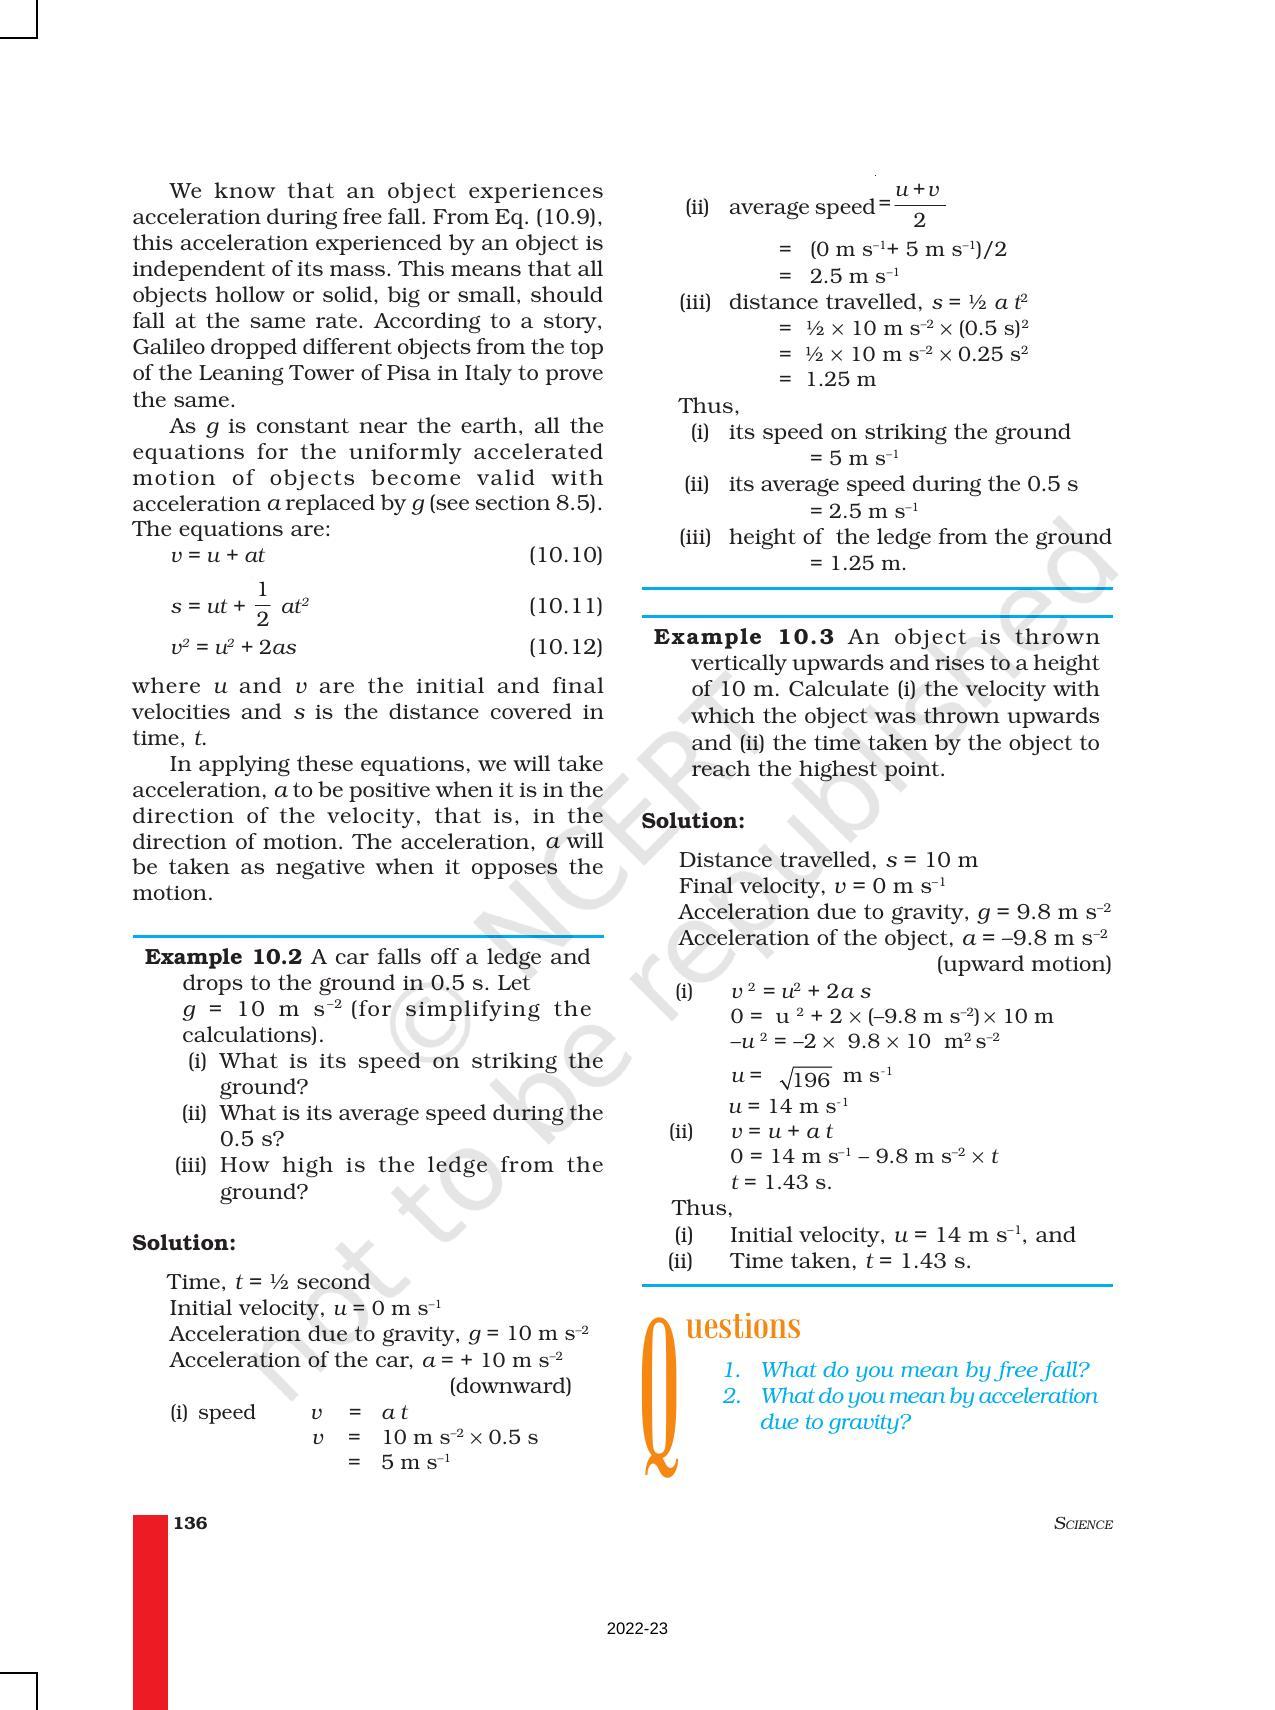 NCERT Book for Class 9 Science Chapter 10 Gravitation - Page 6